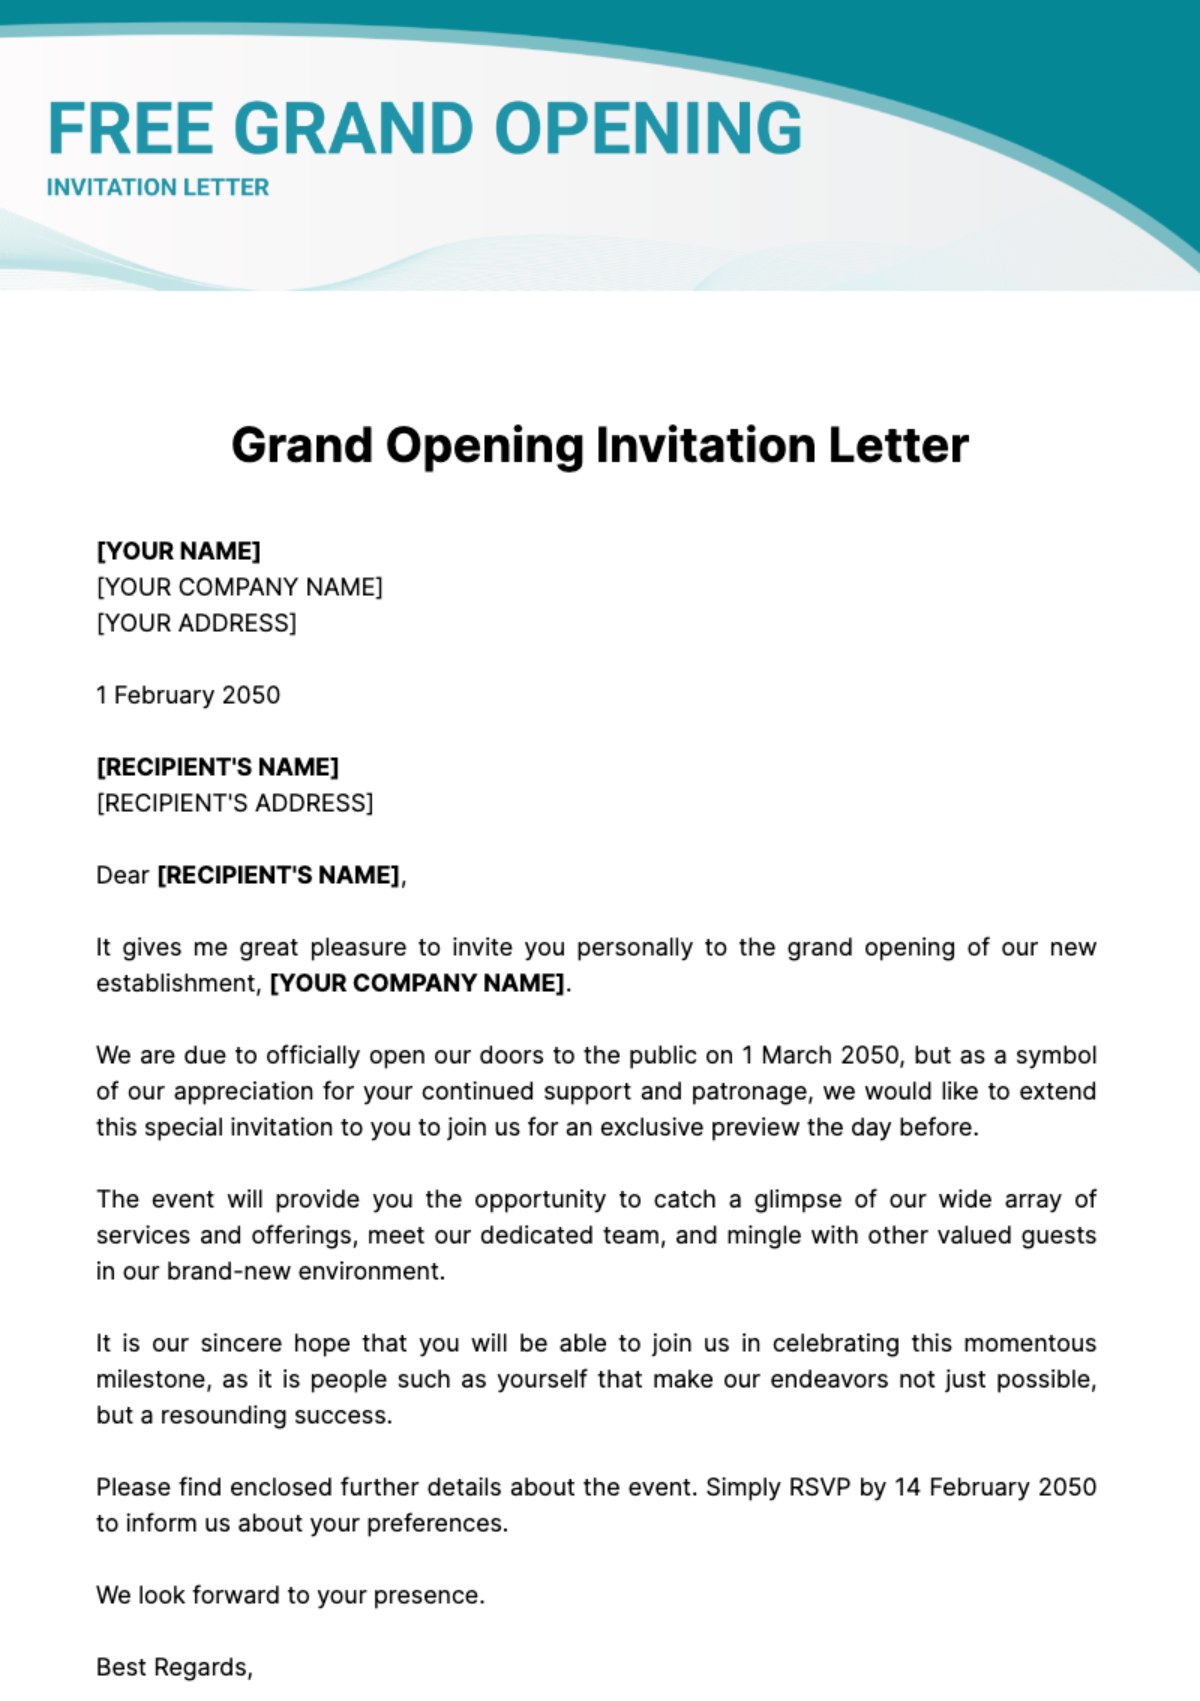 Free Grand Opening Invitation Letter Template